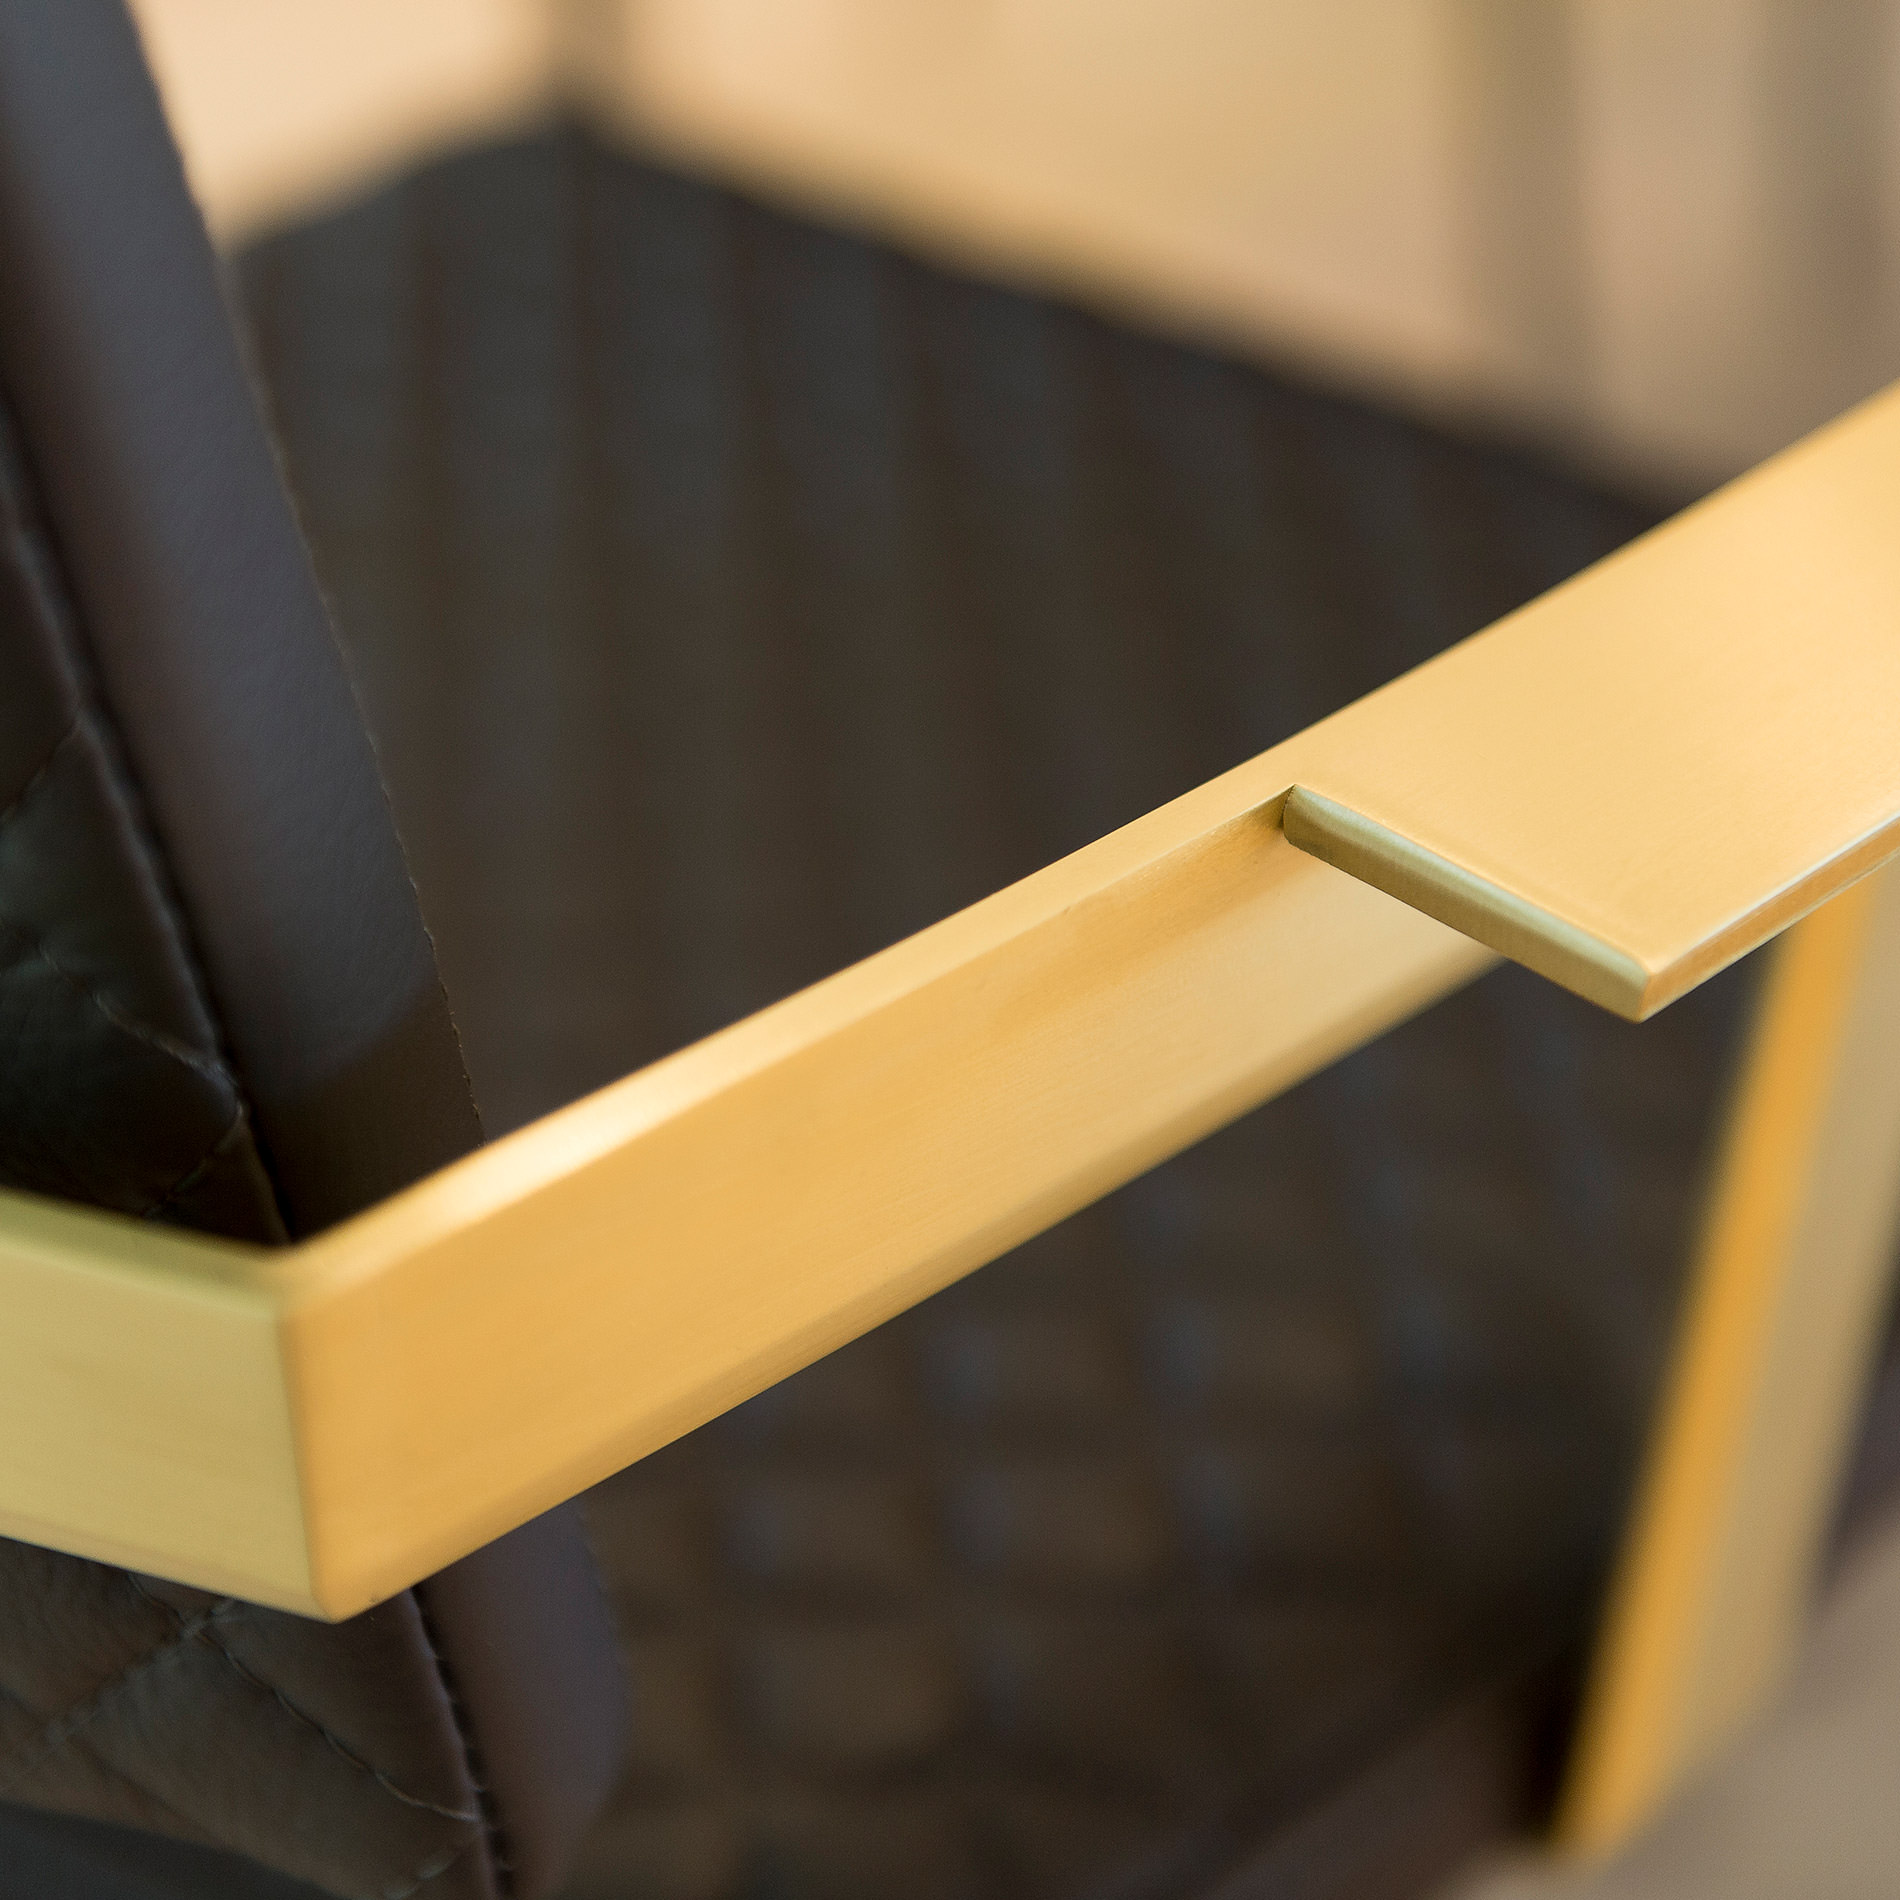 Although strong and solid the brass armrest of Australian designer FrancoCrea's luxury dining chairs are easy to rest on and comfortable for long chats sitting in the dining room